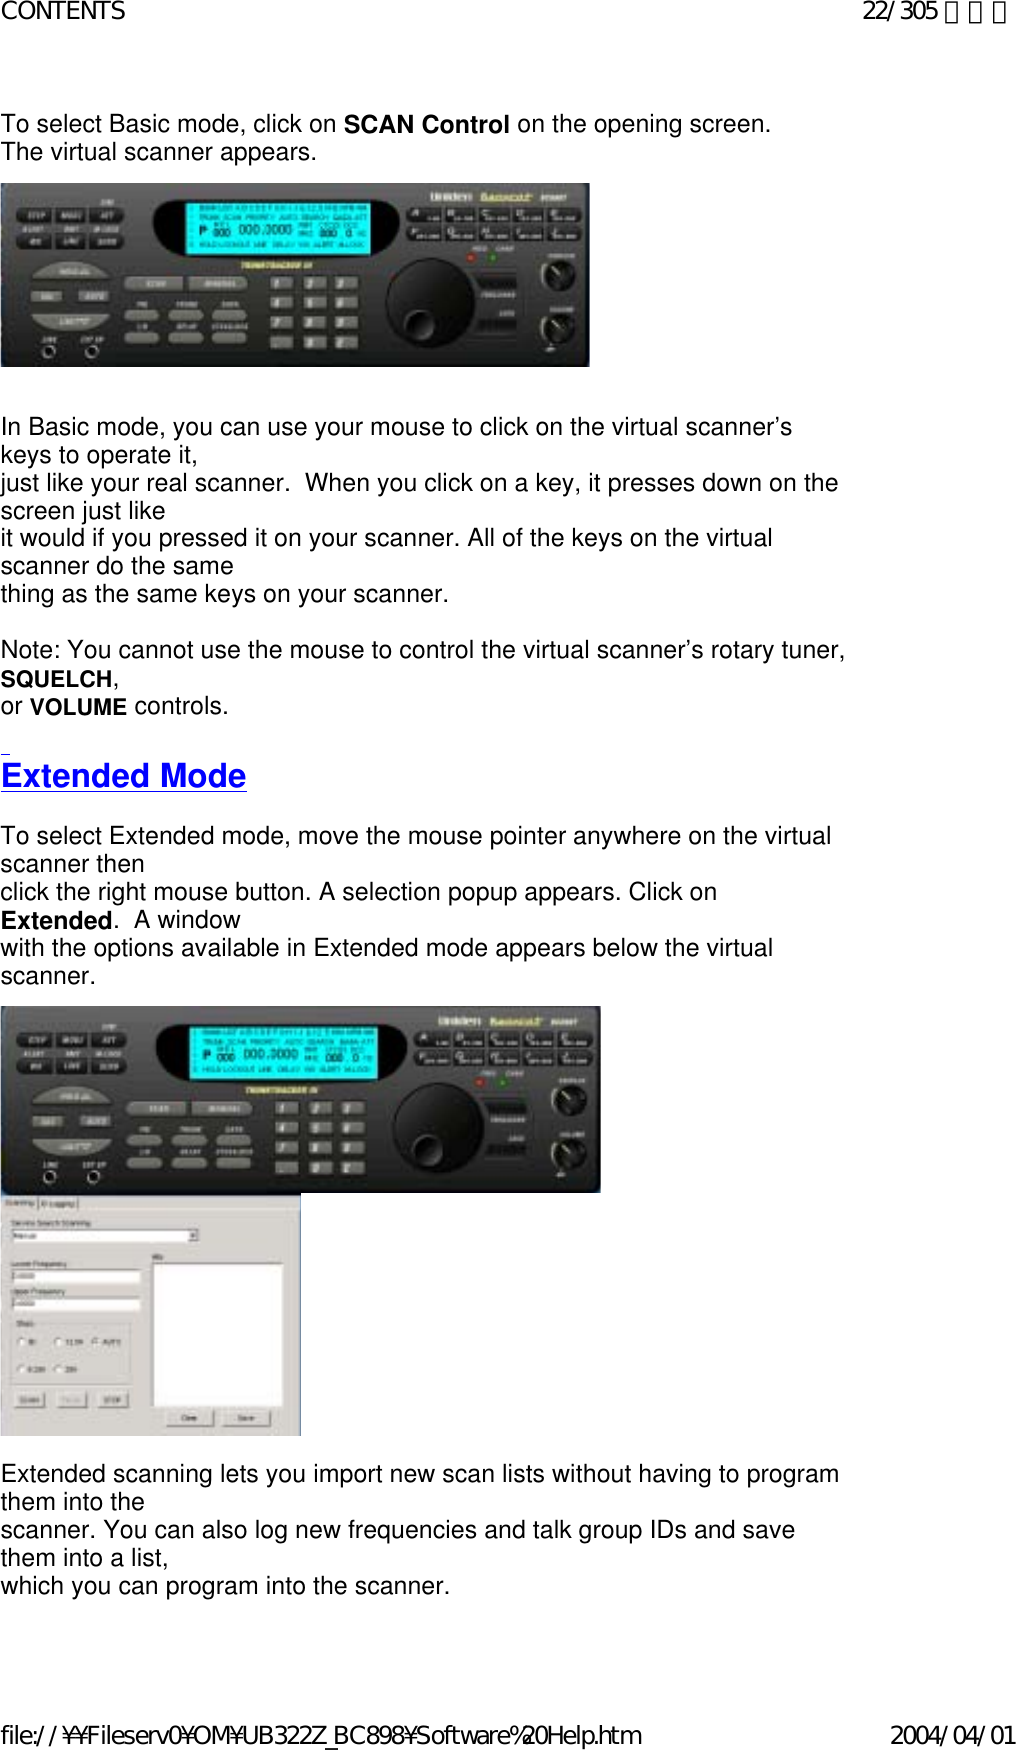 To select Basic mode, click on SCAN Control on the opening screen.   The virtual scanner appears.                  In Basic mode, you can use your mouse to click on the virtual scanner’s keys to operate it,  just like your real scanner.  When you click on a key, it presses down on the screen just like  it would if you pressed it on your scanner. All of the keys on the virtual scanner do the same  thing as the same keys on your scanner.   Note: You cannot use the mouse to control the virtual scanner’s rotary tuner, SQUELCH,  or VOLUME controls.   Extended Mode   To select Extended mode, move the mouse pointer anywhere on the virtual scanner then  click the right mouse button. A selection popup appears. Click on Extended.  A window  with the options available in Extended mode appears below the virtual scanner.                                  Extended scanning lets you import new scan lists without having to program them into the  scanner. You can also log new frequencies and talk group IDs and save them into a list,  which you can program into the scanner.   22/305 ページCONTENTS2004/04/01file://¥¥Fileserv0¥OM¥UB322Z_BC898¥Software%20Help.htm